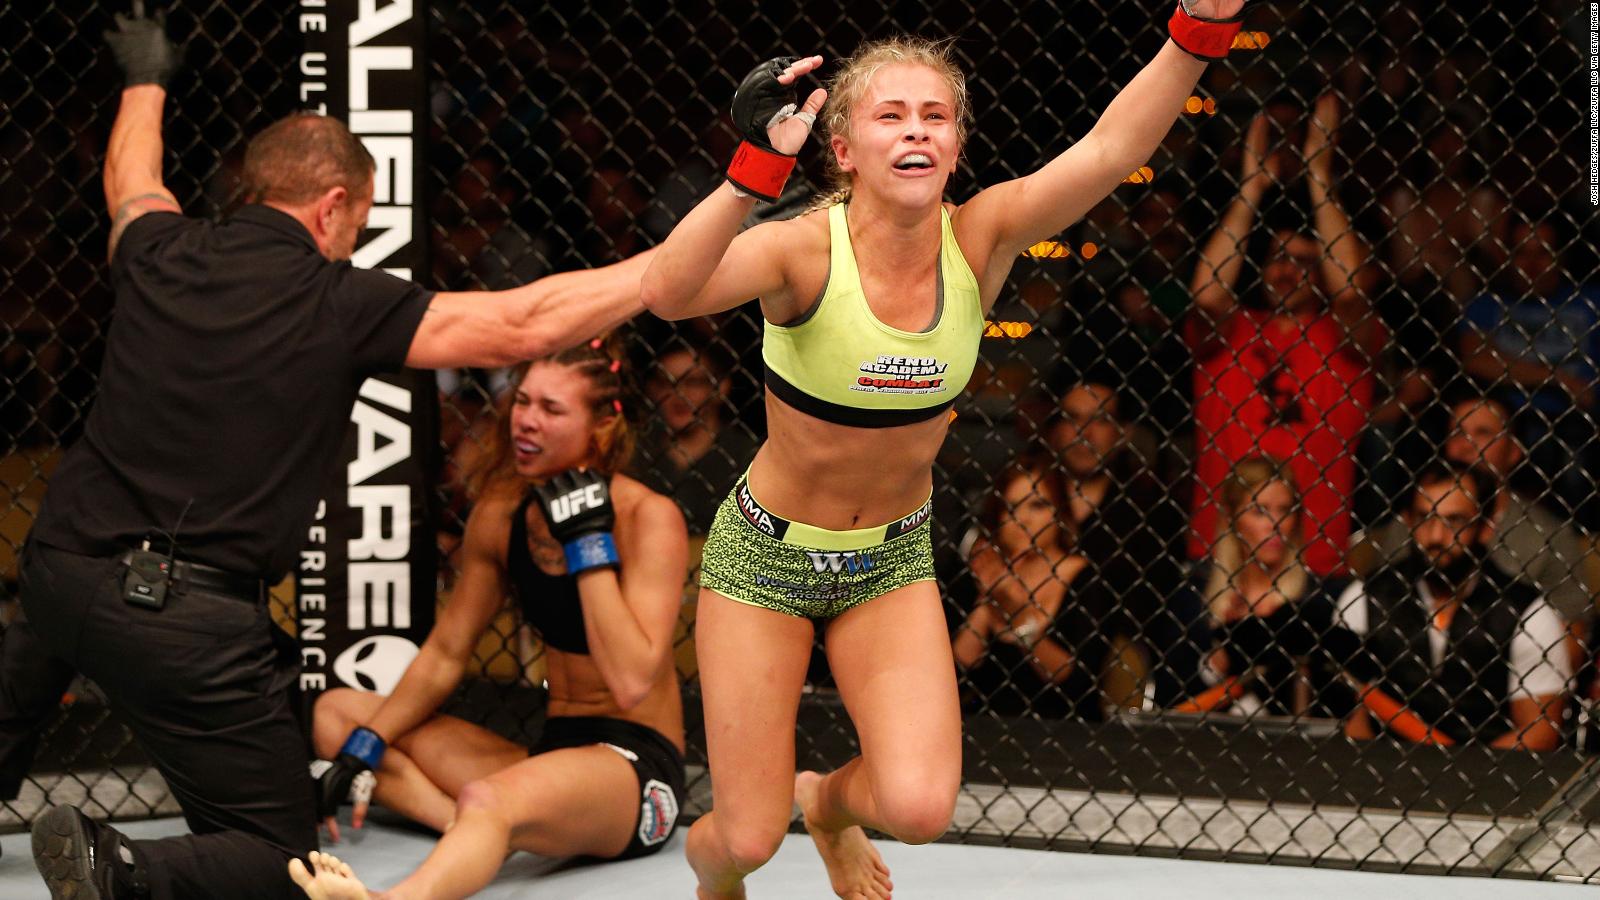 Ufc S Paige Vanzant Shares Naked Self Isolation Images Sending Social